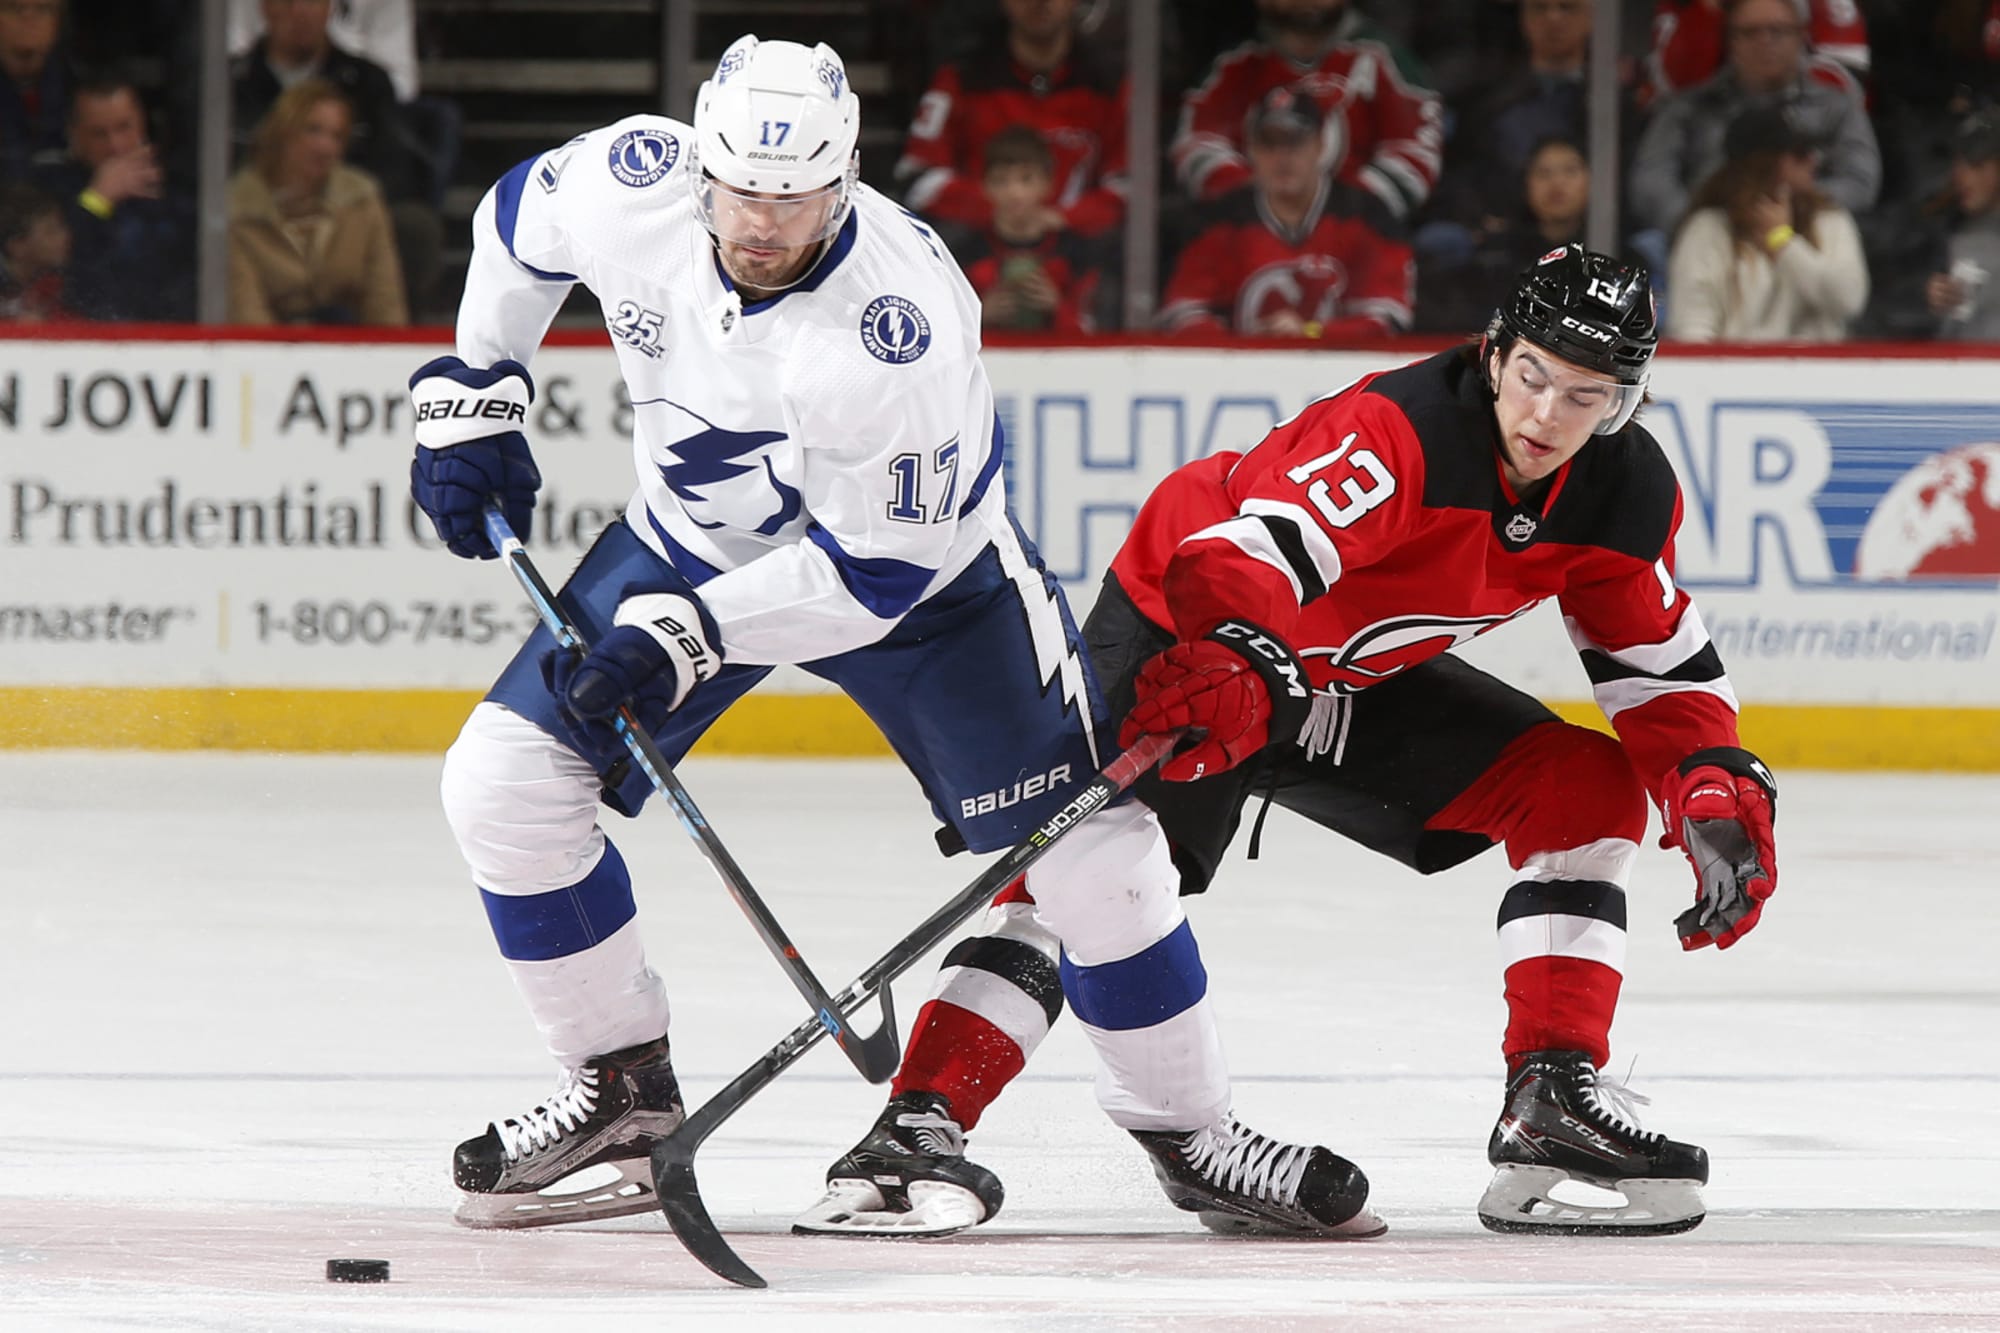 NHL Playoffs 2018: Tampa Bay Lightning vs. Devils preview and prediction